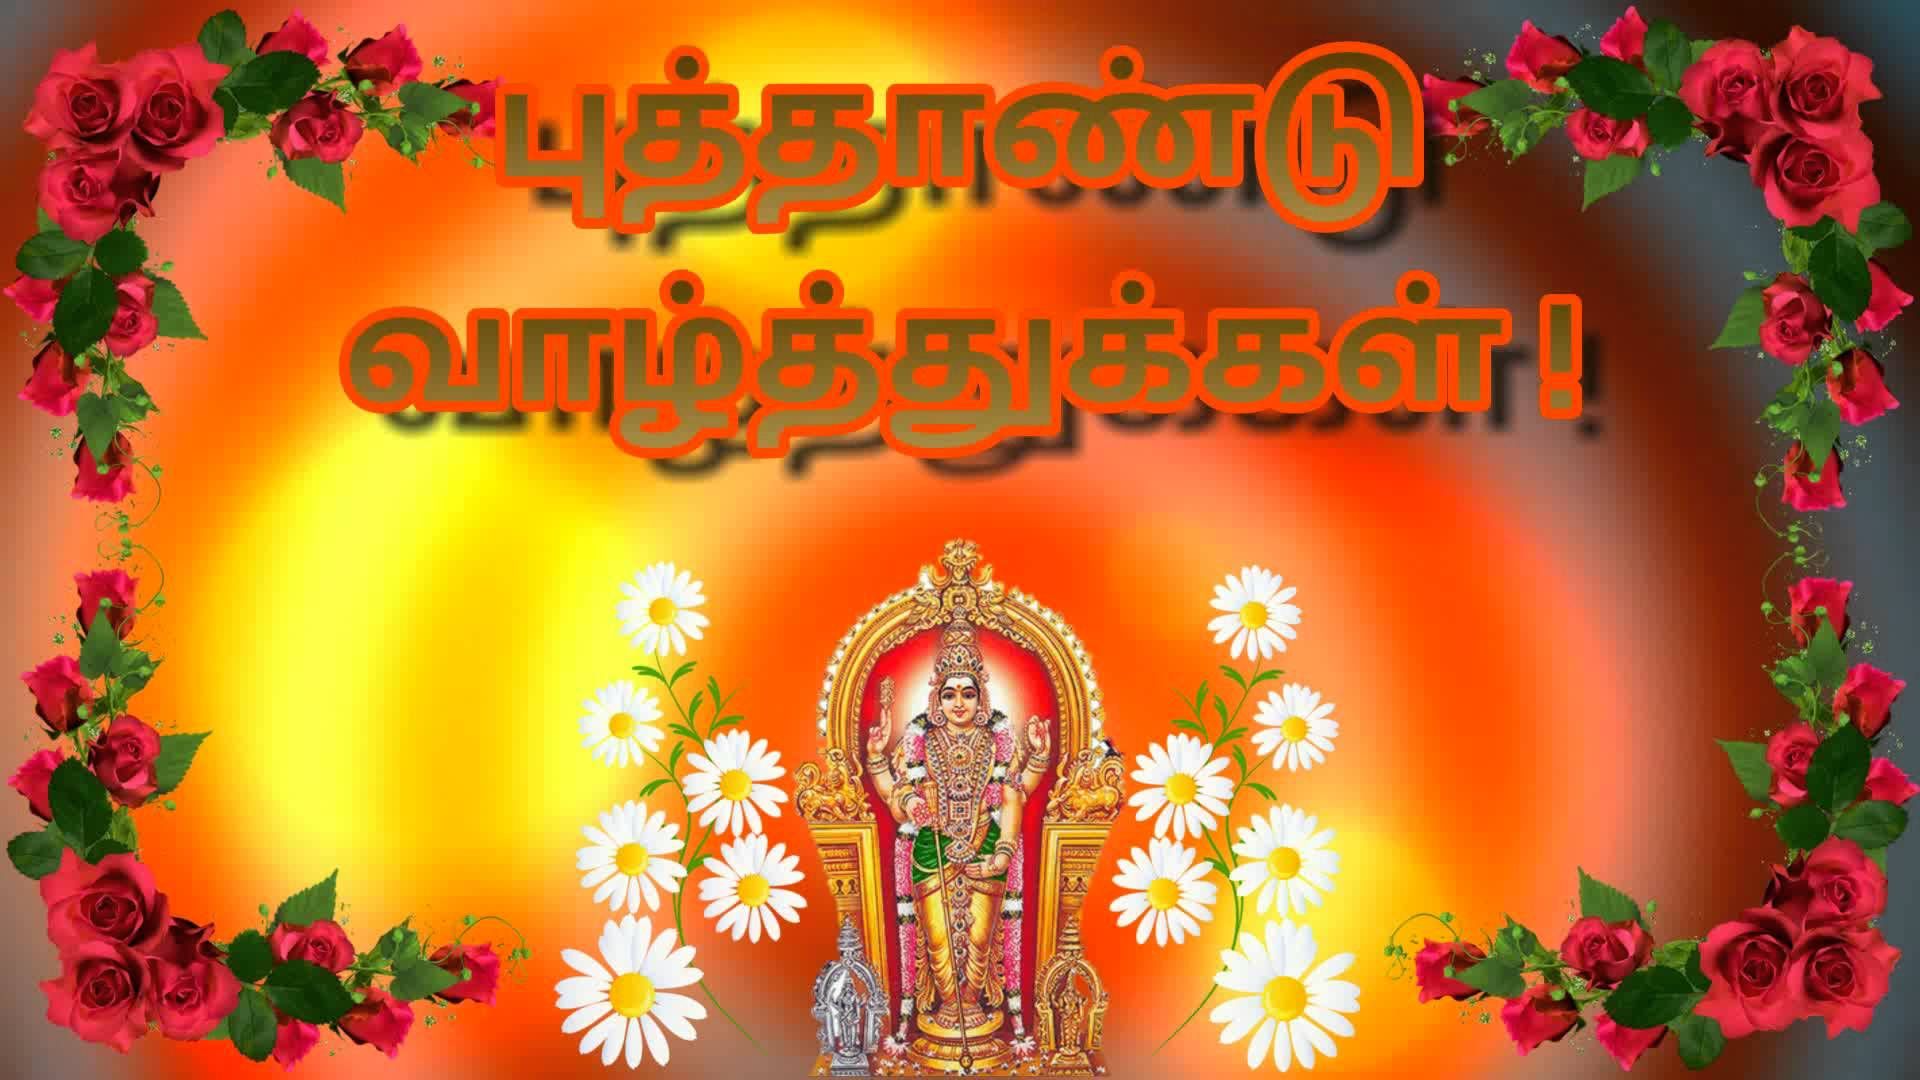 Tamil New Year Wallpaper Free Tamil New Year Background